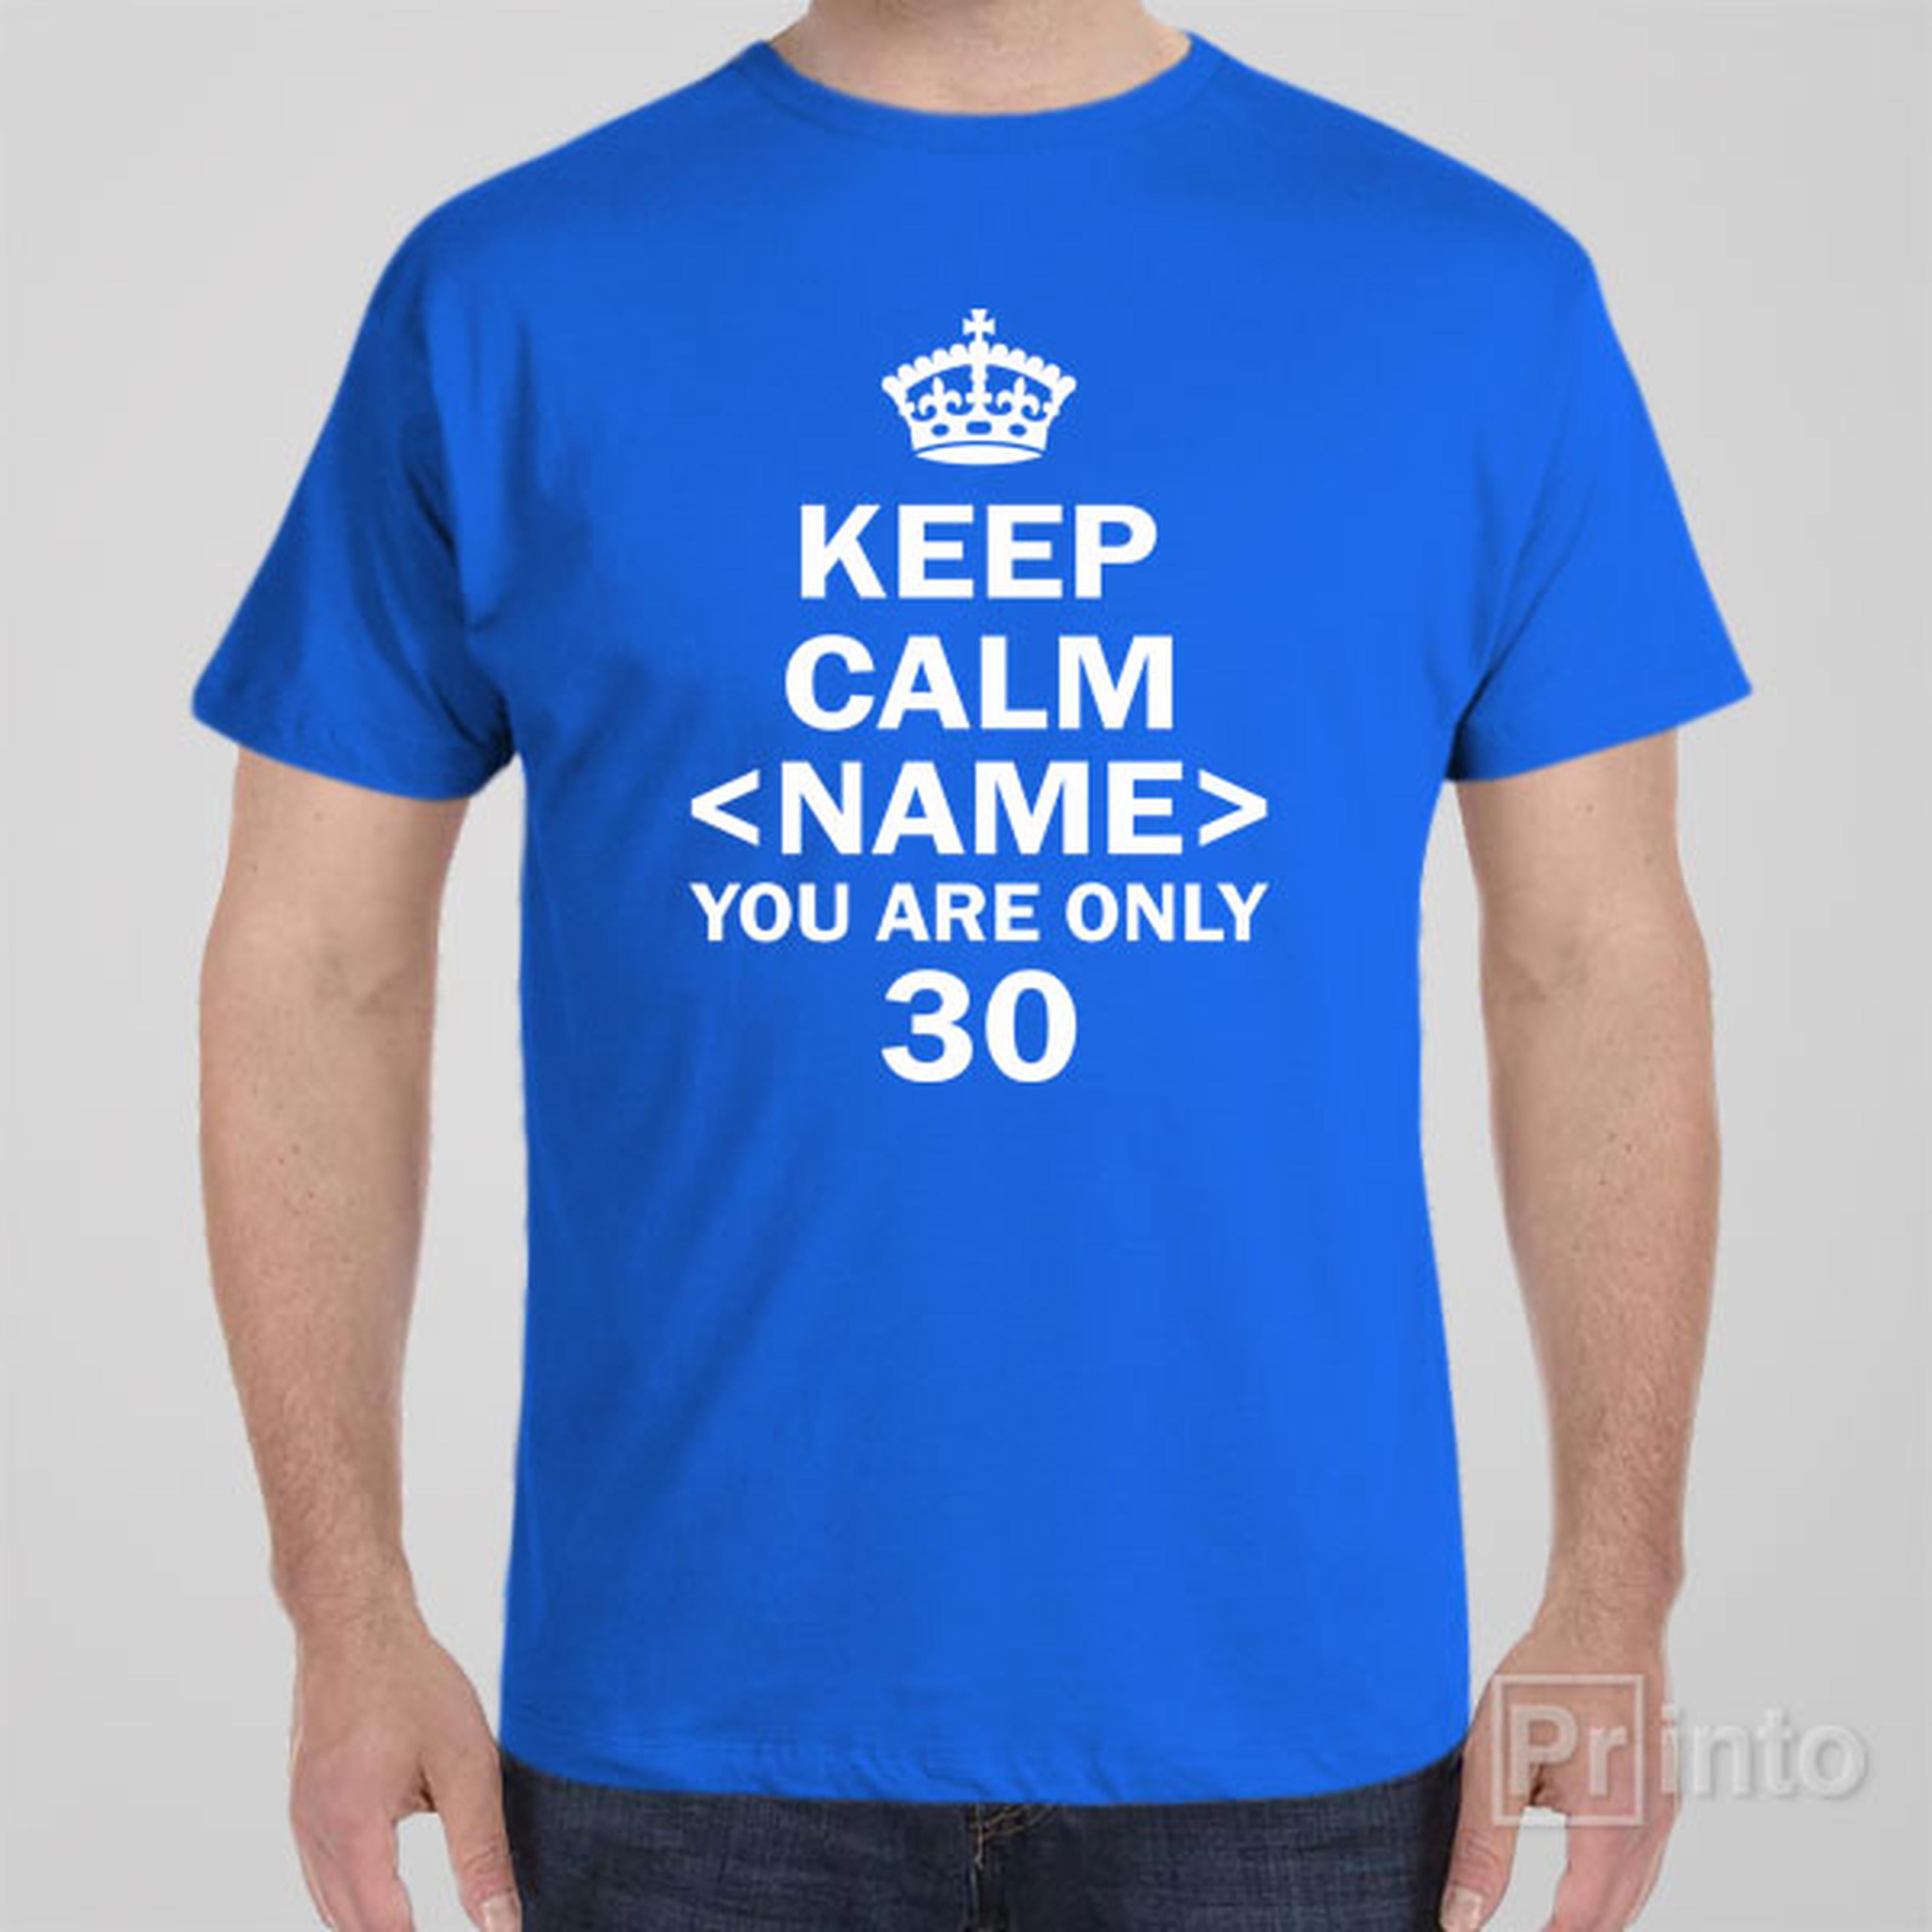 keep-calm-you-are-only-30-t-shirt